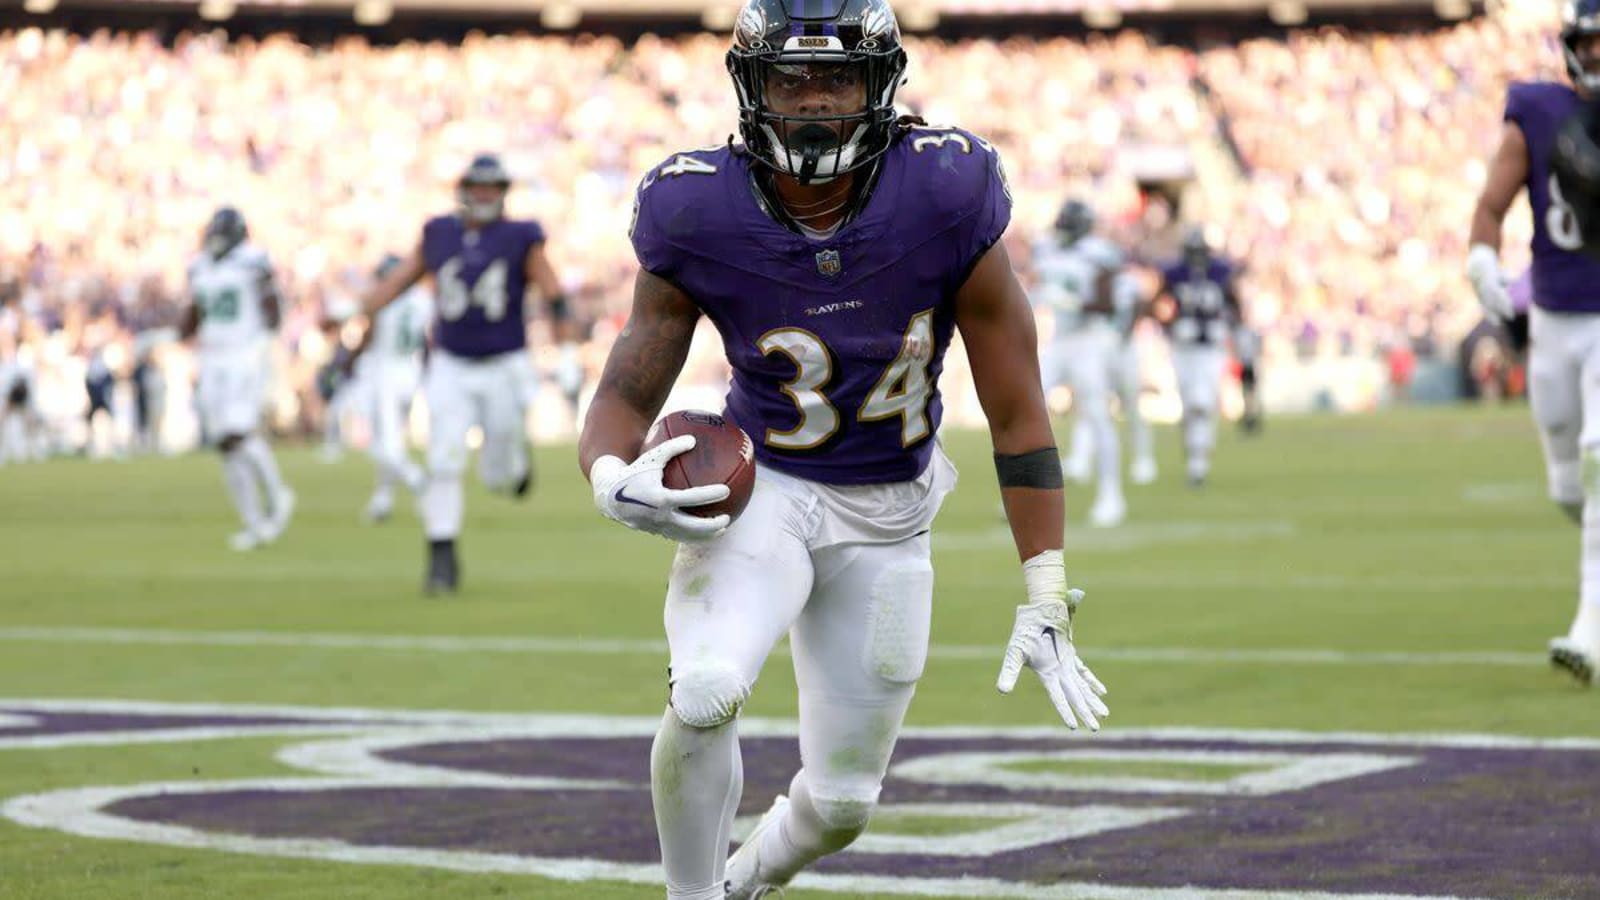 &#39;Great Attitude and Demeanor!&#39; Ravens RB Keaton Mitchell After &#39;Heartbreaking&#39; Injury